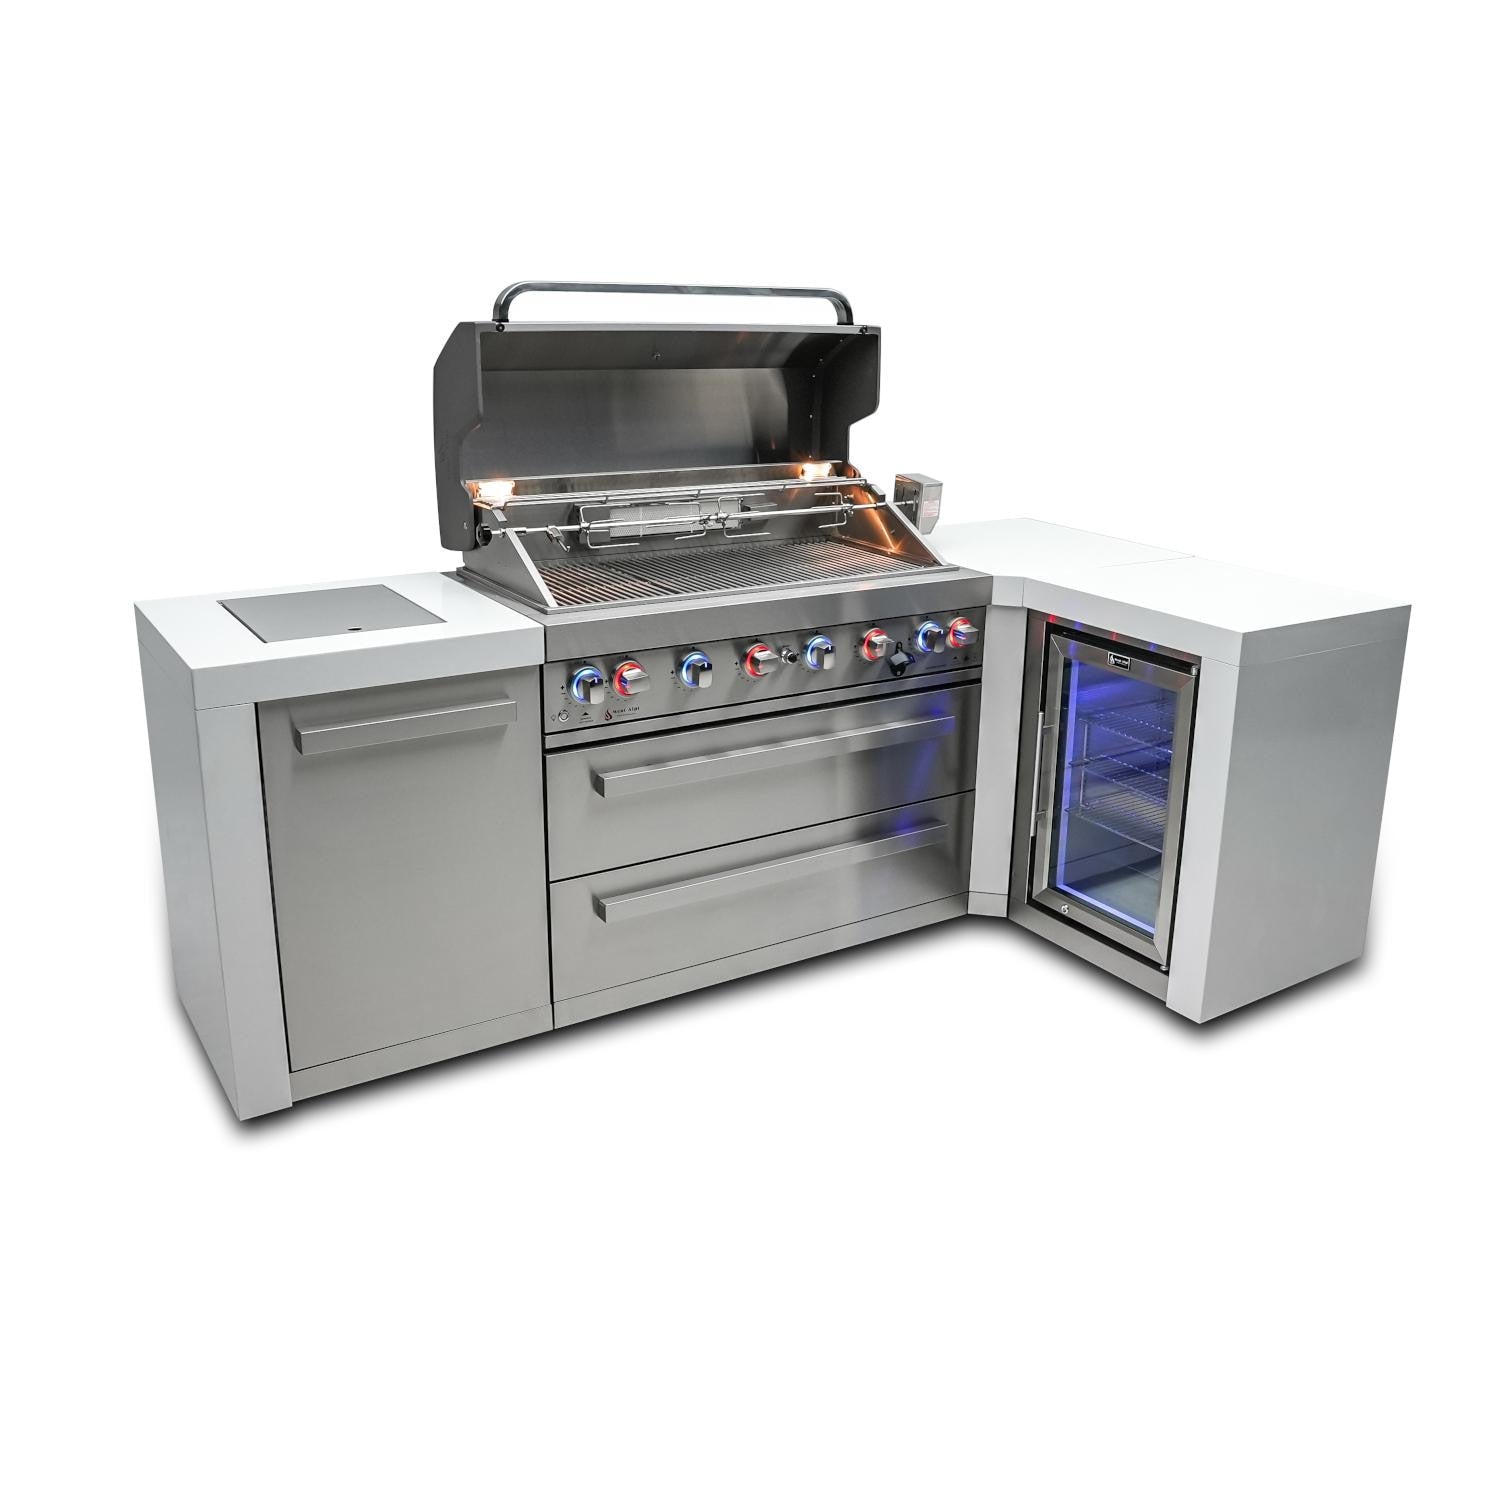 Mont Alpi 805 Deluxe Island Grill with 90 Degree Corner and Fridge Cabinet, MAi805-D90FC